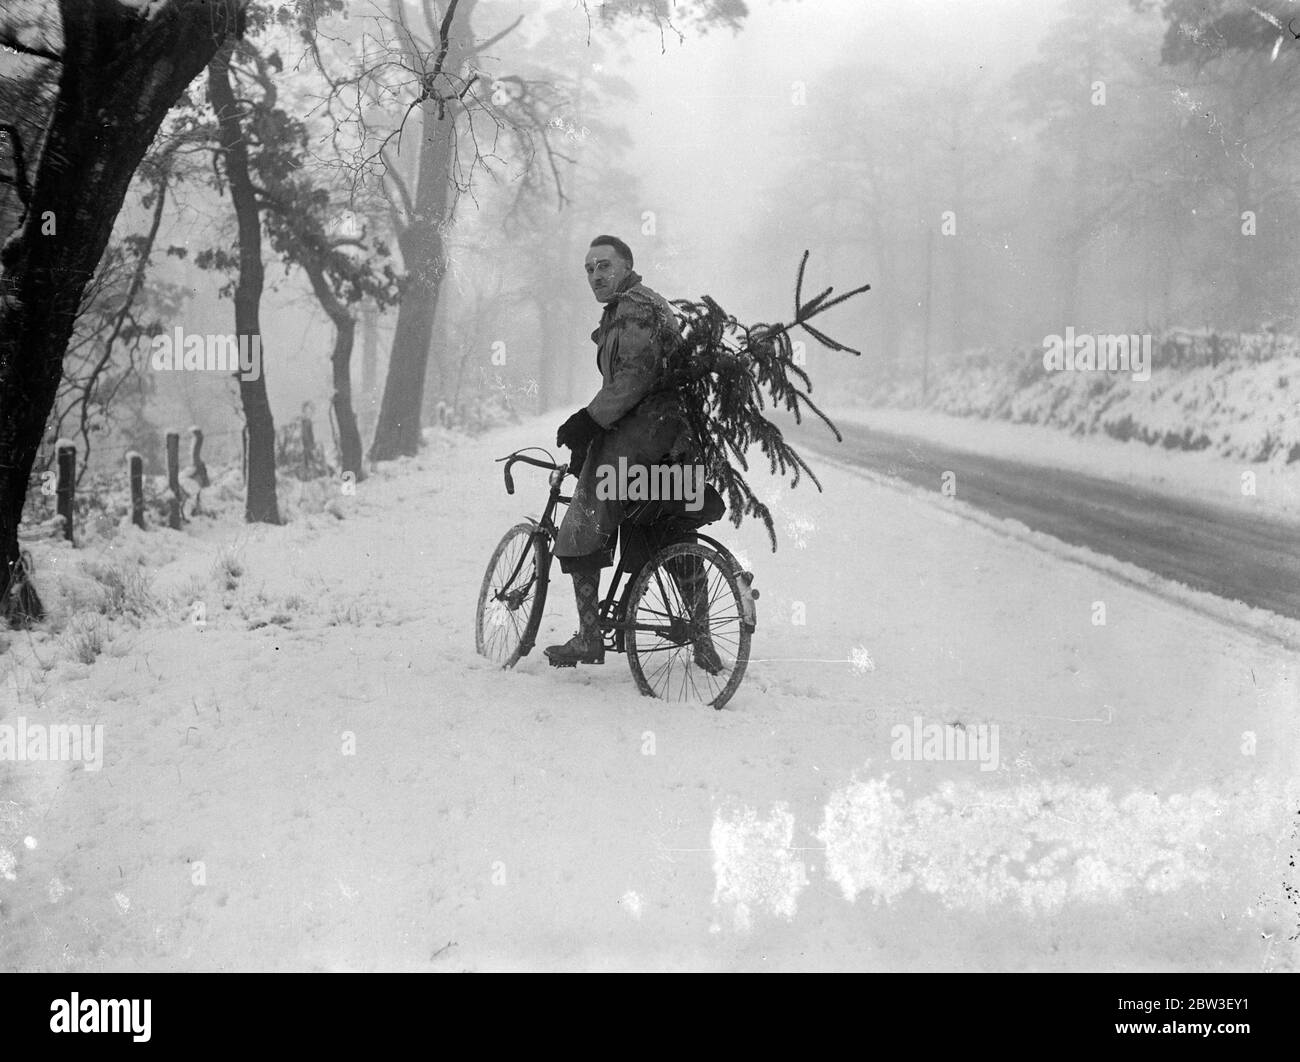 Carrying home his christmas tree . Cheshire and Derbyshire seem assured of a white christmas . Snow has fallen covering the moors to a depth of several inches . Photo shows , carrying home his christmas tree in true christmas weather at Alderley Edge , Cheshire . 21 December 1935 Stock Photo